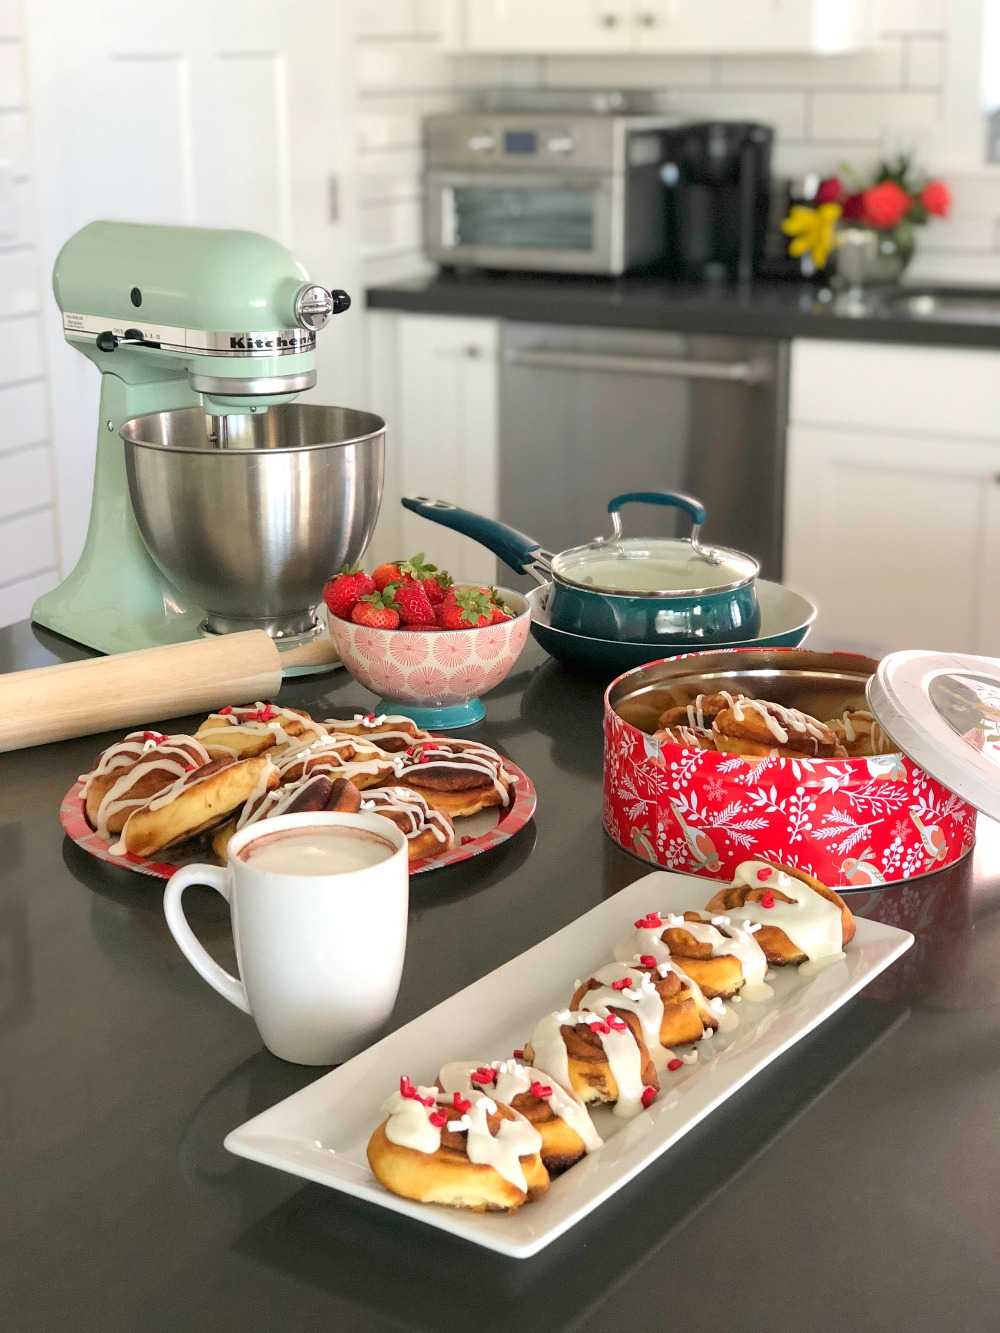 The Ultimate Weekend Brunch Gift Guide. Connect with family and friends with food! Get together and bake up a batch of soft and gooey cinnamon rolls and sit down with a frothy latte or whipped hot cocoa. This gift guide feature everything you need to create a brunch for a special occasion as well as brunch you can whip up every weekend! #sponsored #WalmartTopGifts #giftguide #giftsforthecook #holidaygiftguide